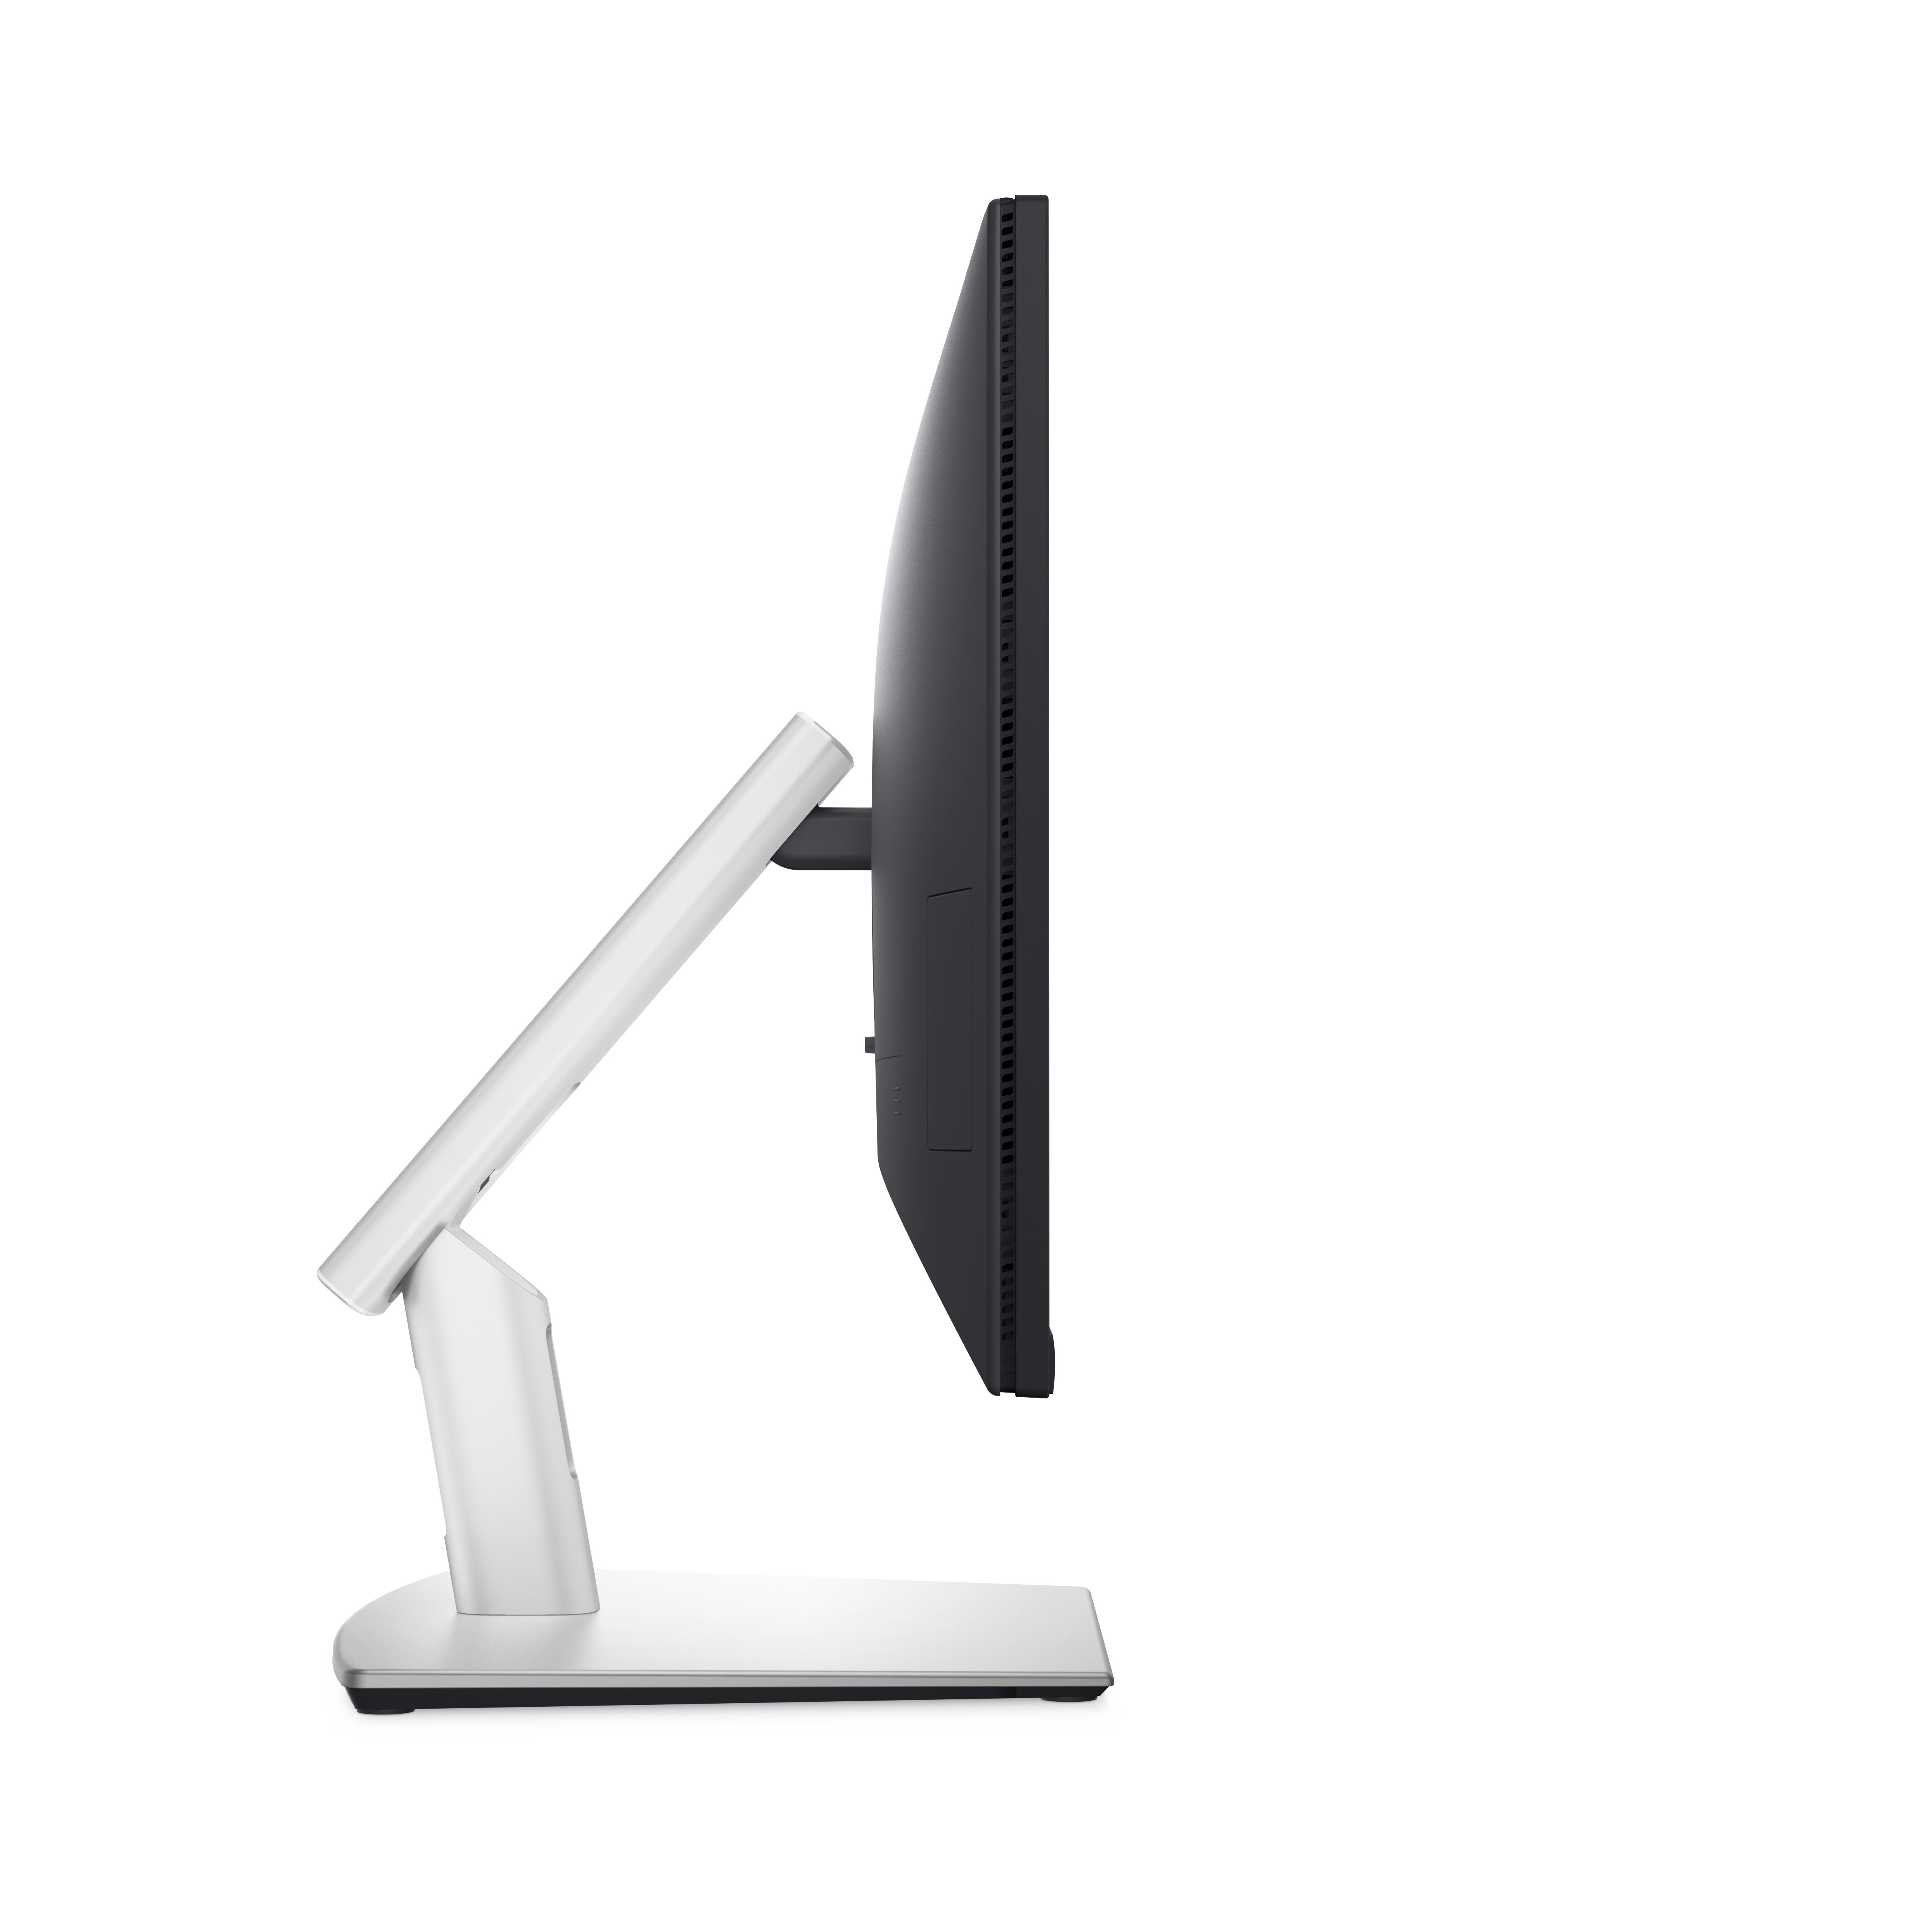 DELL 24 Touch USB-C Hub Monitor P2424HT